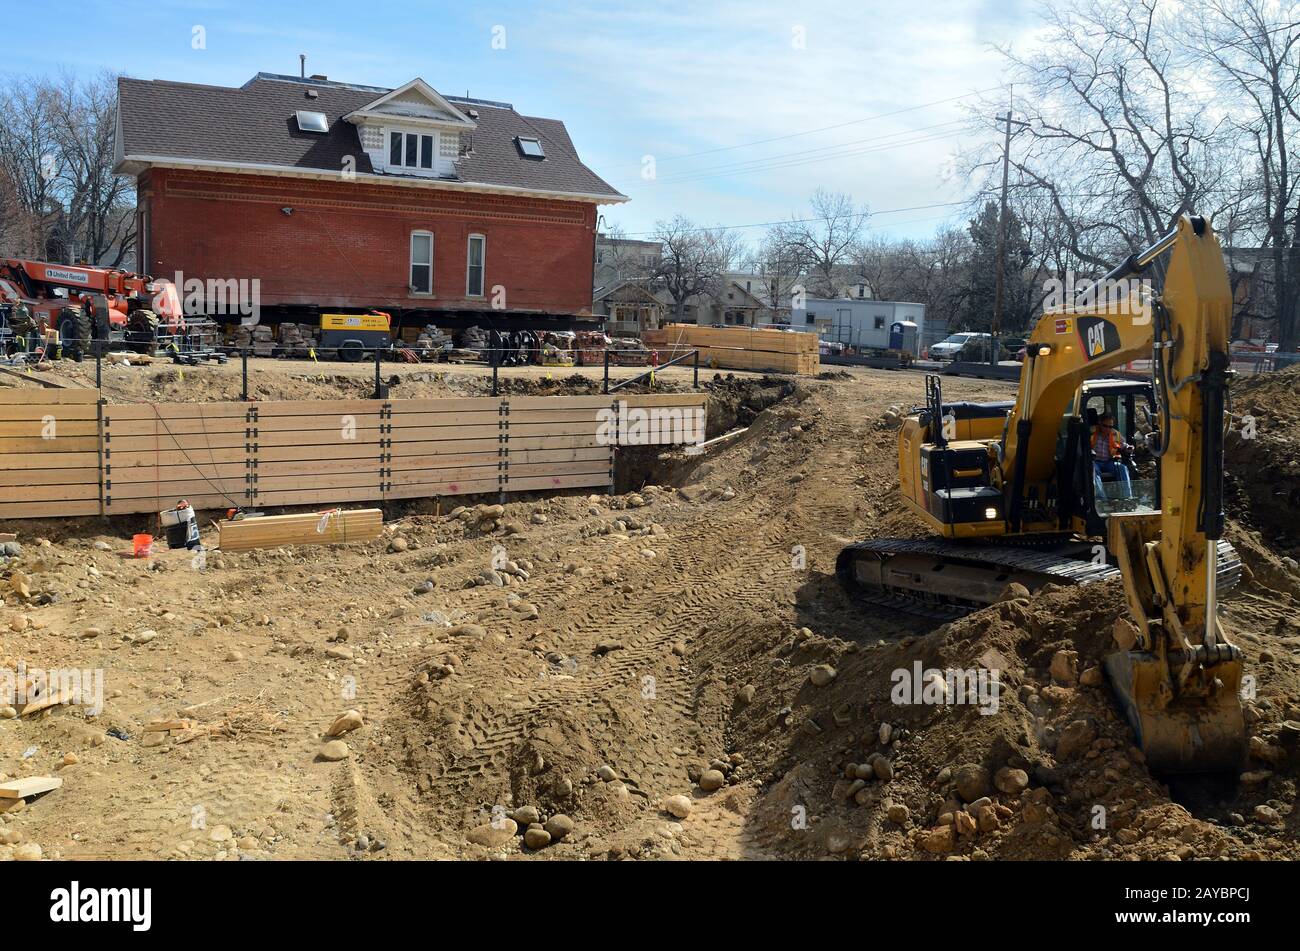 A small excavator digs a basement parking facility for Attention Homes new apartments for homeless young adults, ages 18 to 24. Stock Photo